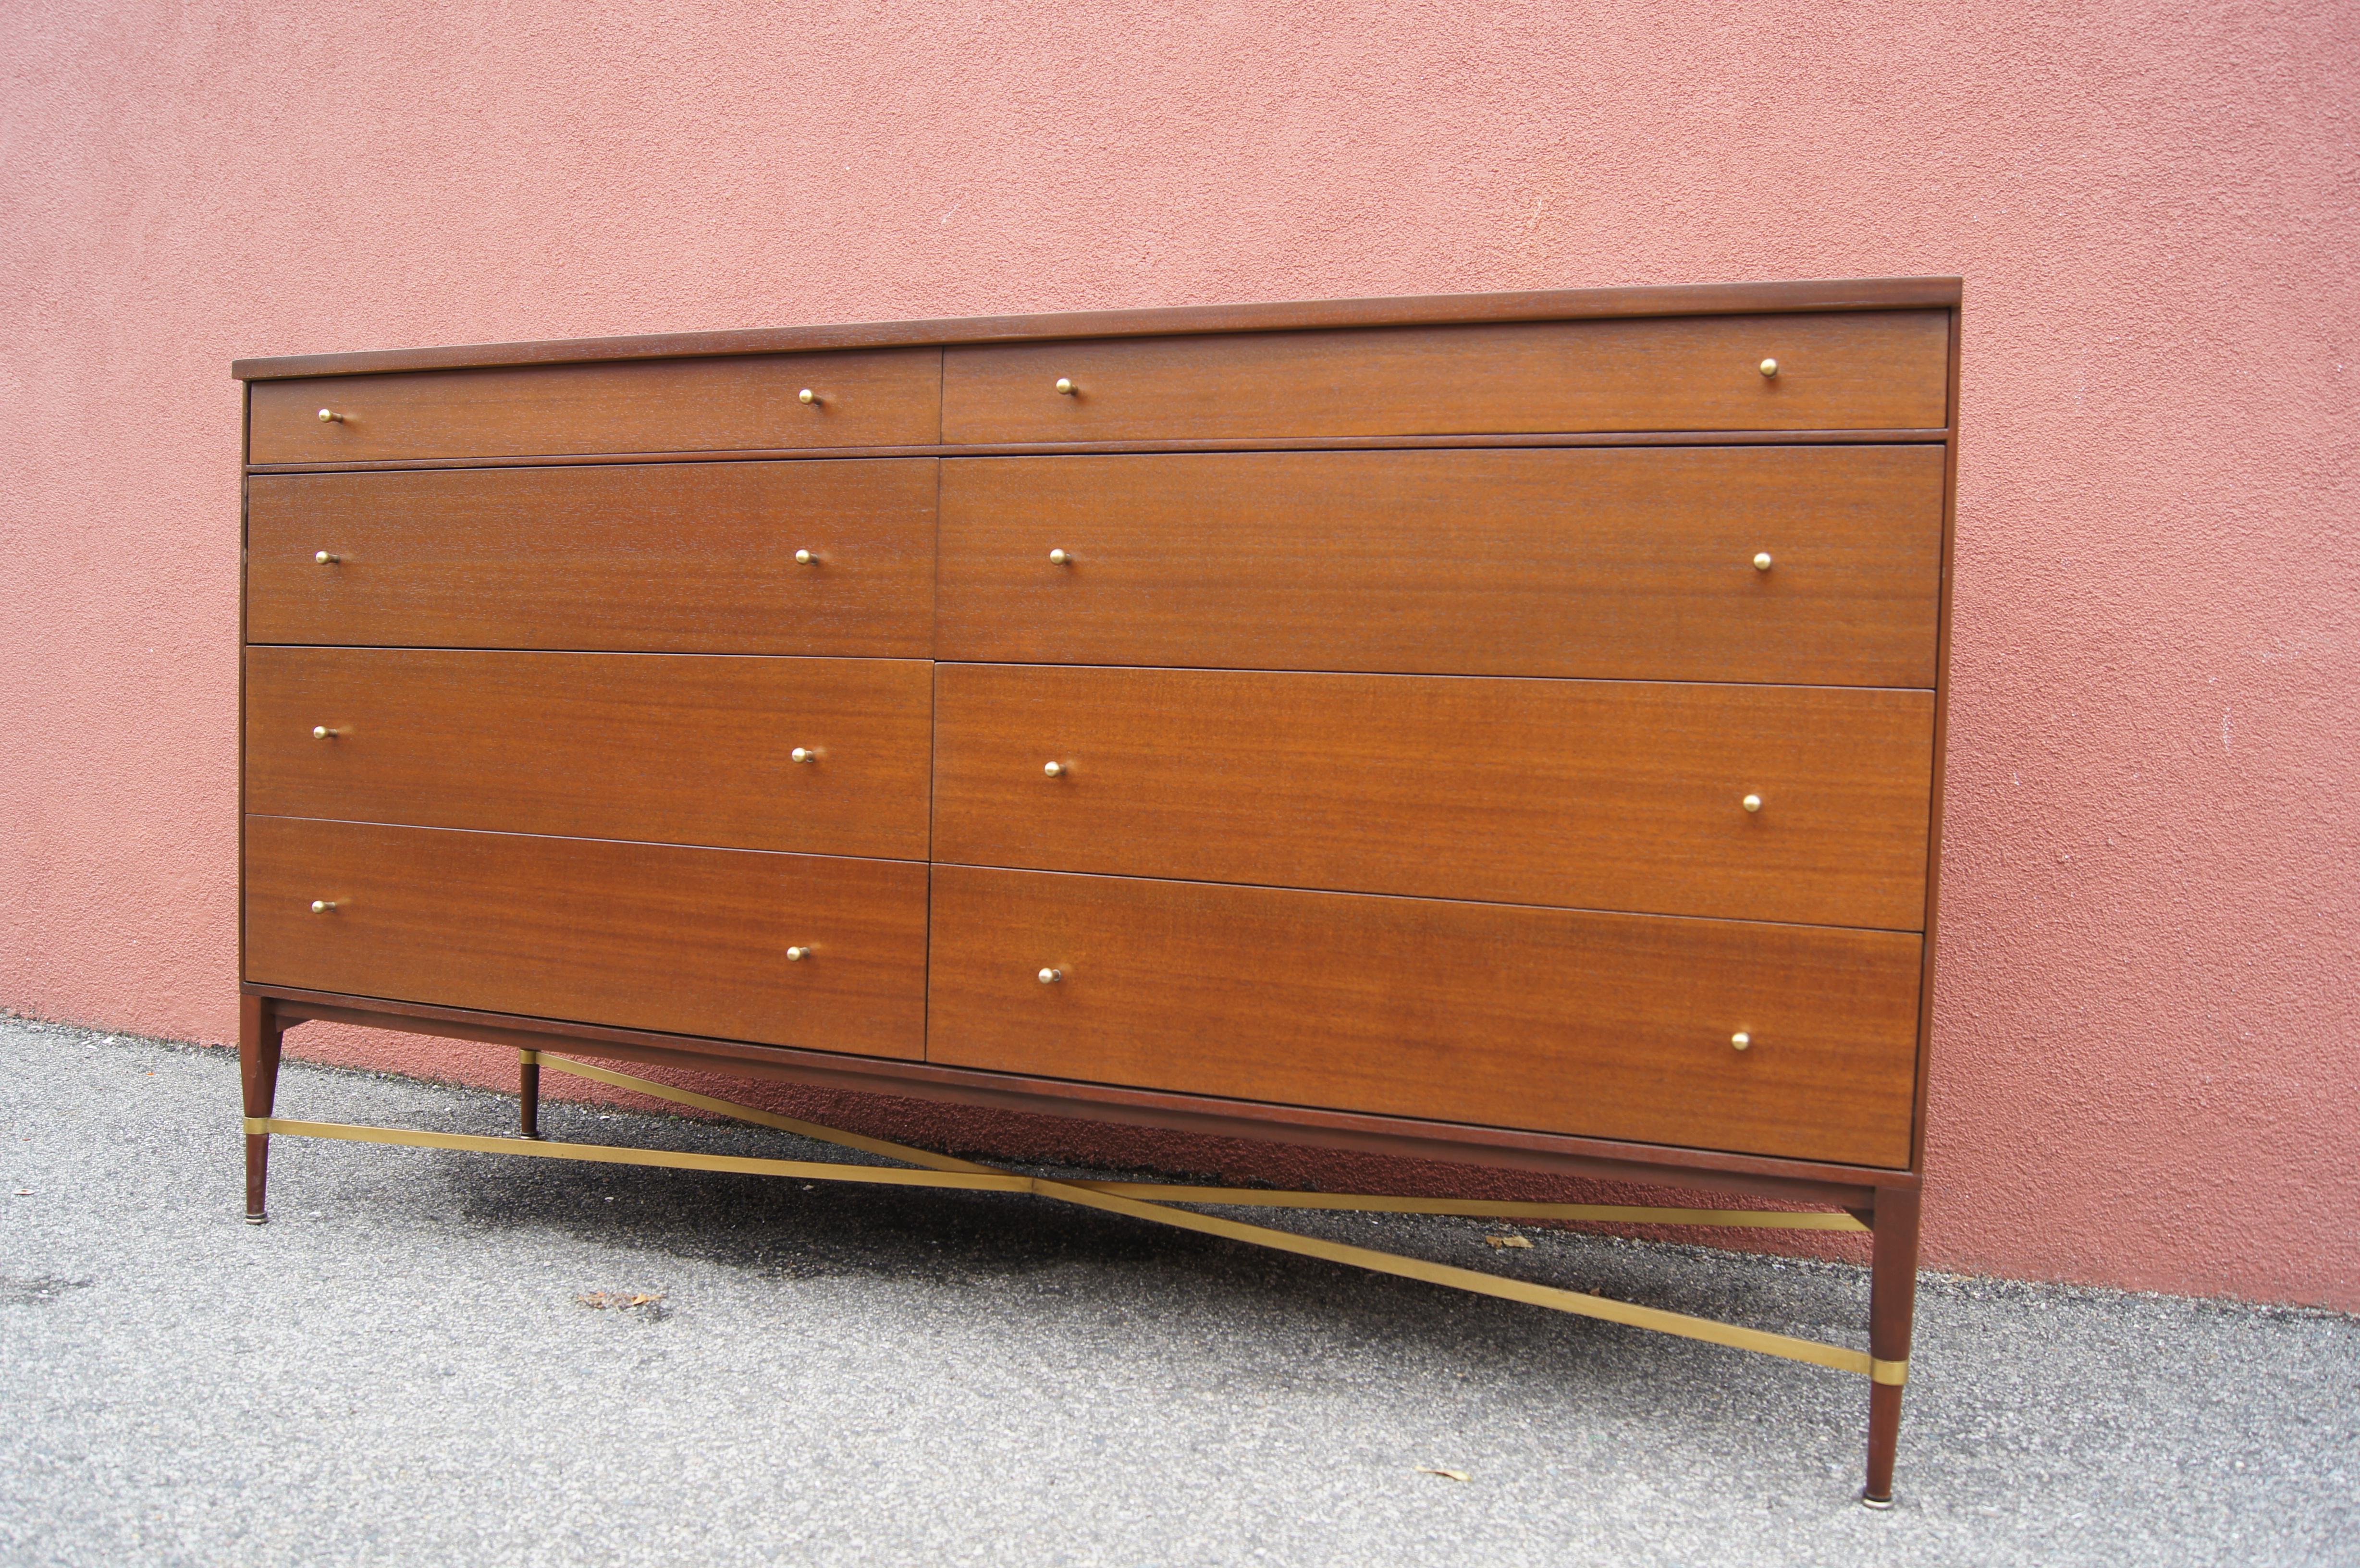 Paul McCobb designed this double dresser for the Calvin Group's Irwin Collection. A walnut-stained mahogany case sits on delicately tapered legs with a brass cross brace. The eight drawers, the topmost of which are shallower, feature small rounded